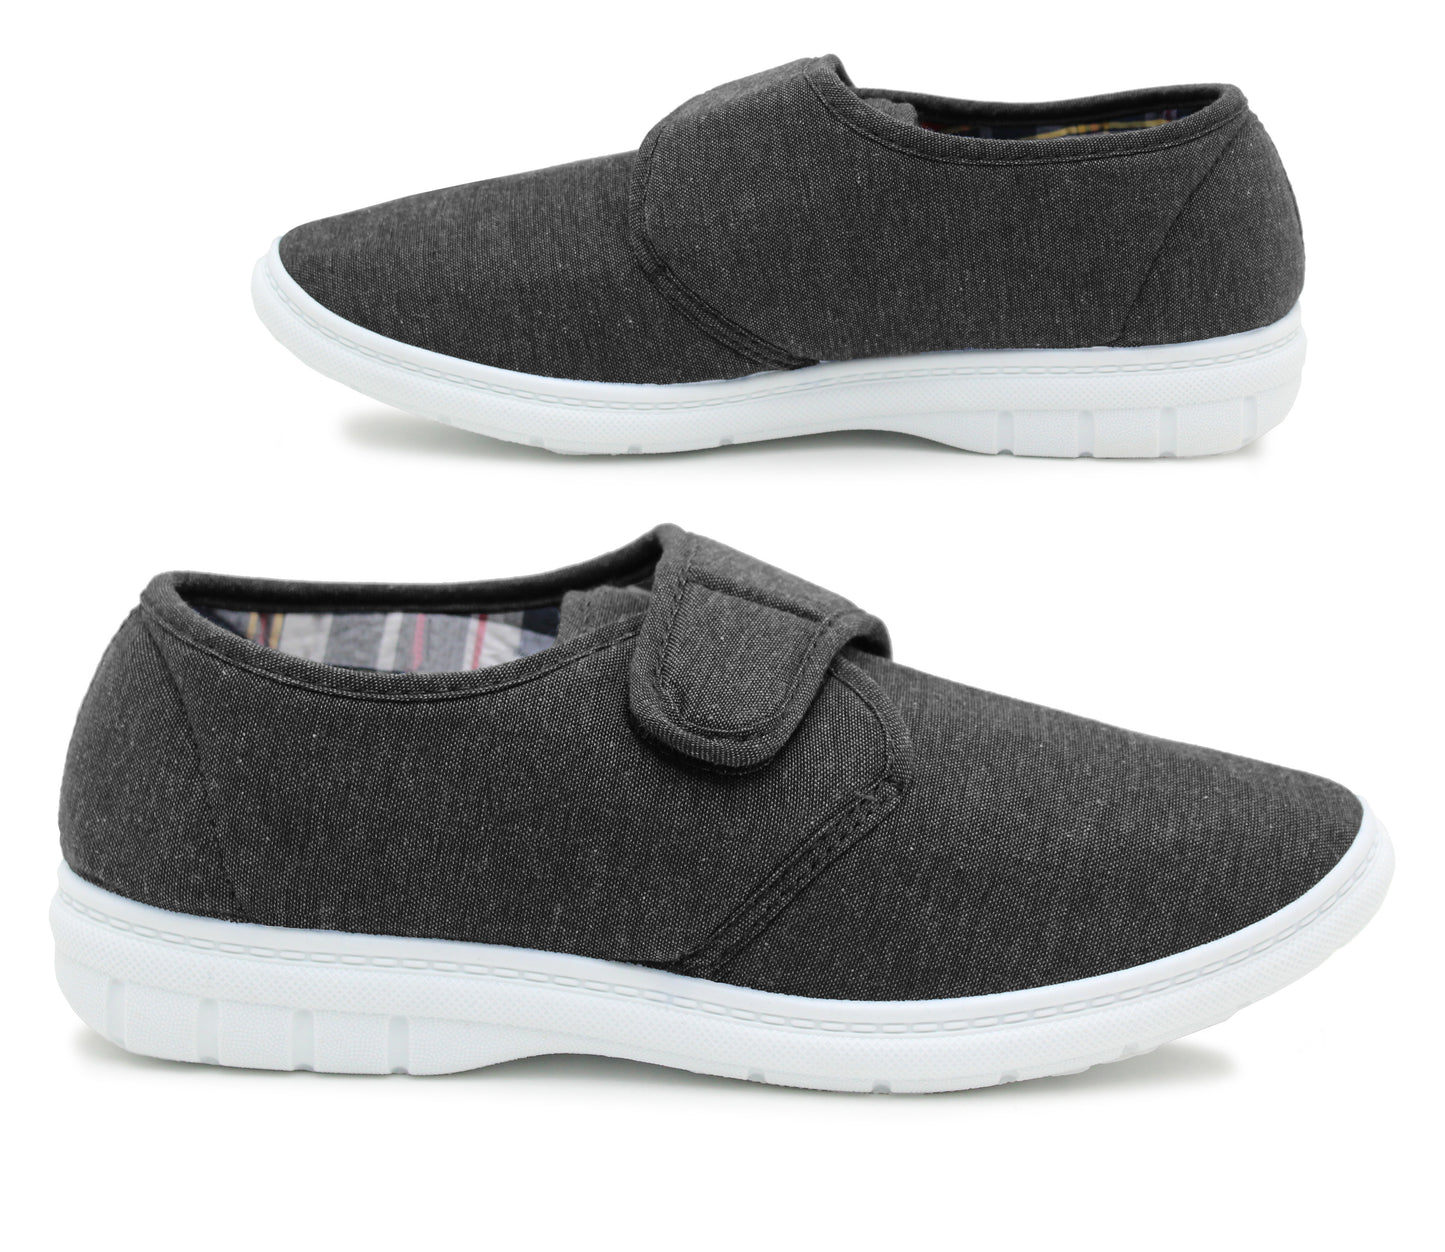 Mens Touch Fasten Casual Grey Canvas Trainer Pumps Flat Driving Loafers Shoes